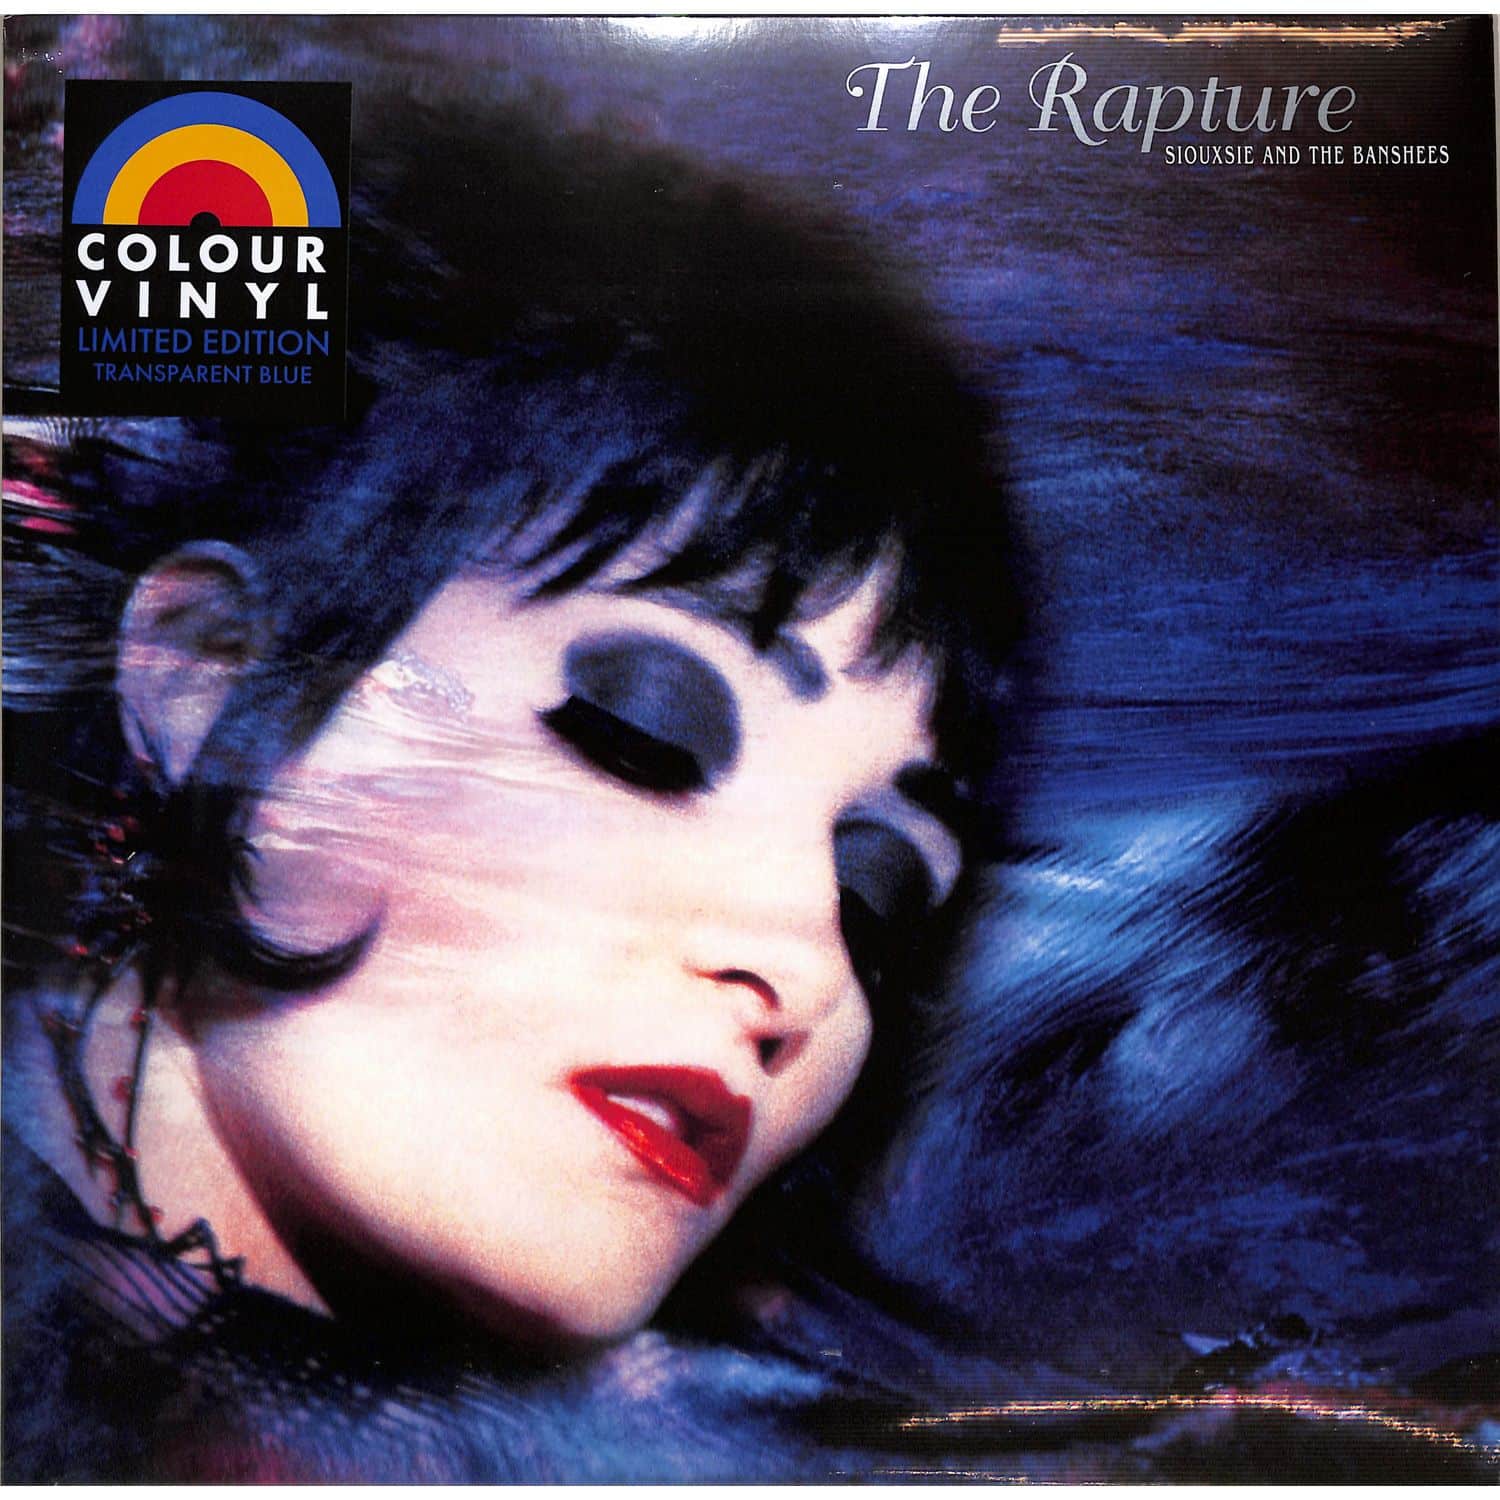 Siouxsie & The Banshees - THE RAPTURE 